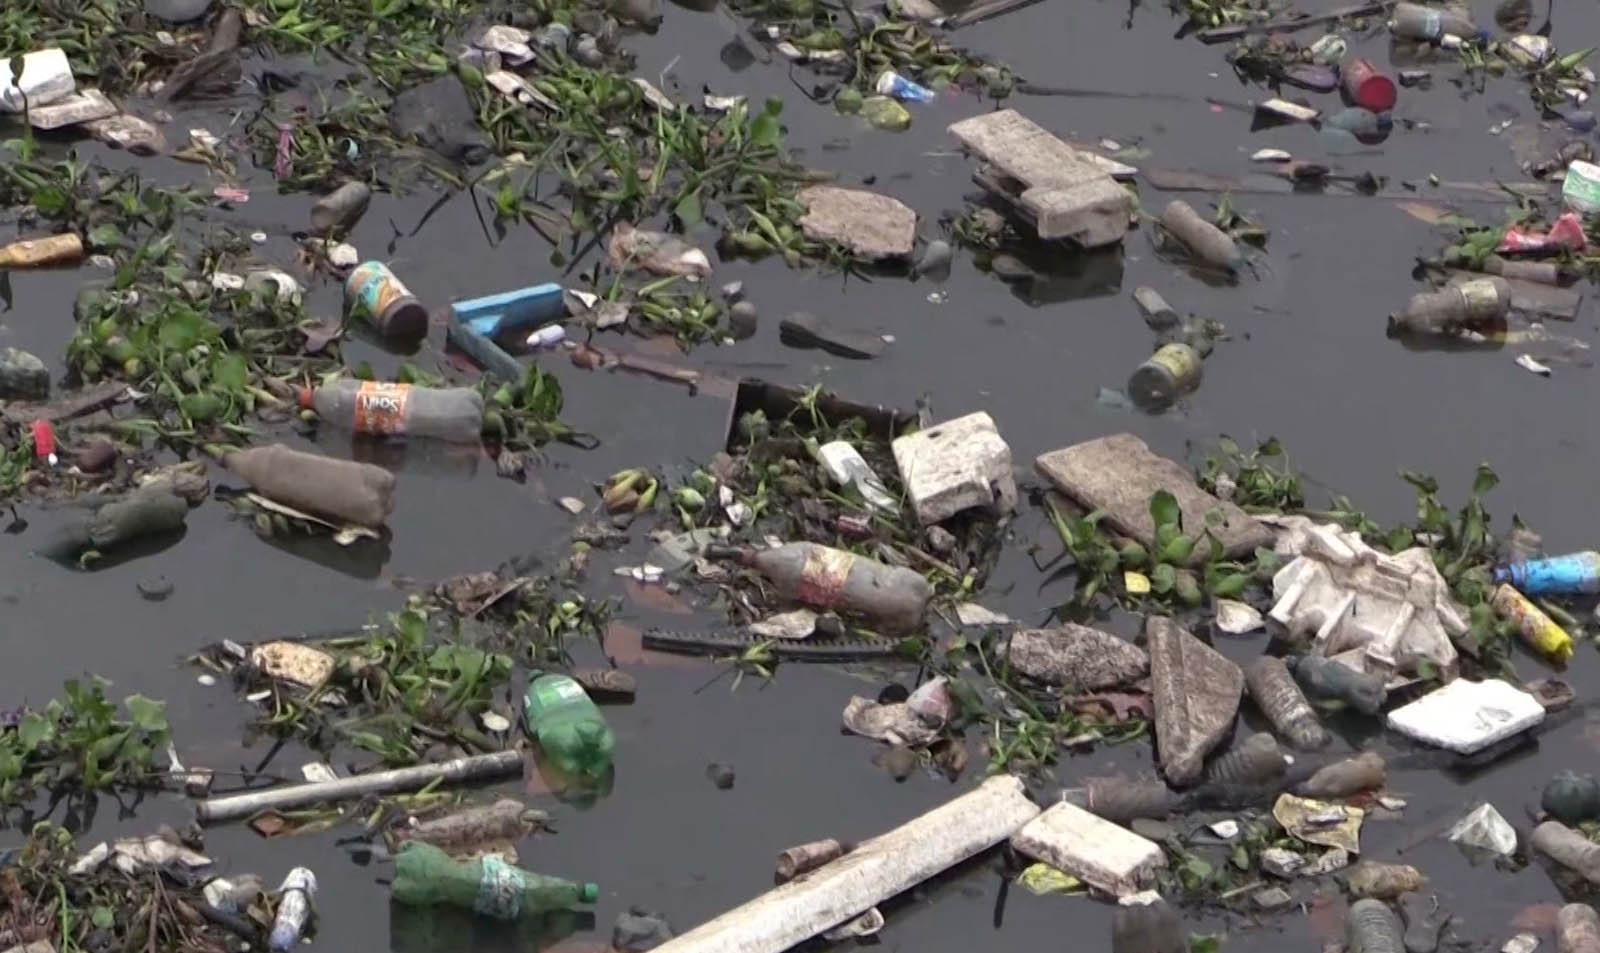 Raw sewage in Rio waters where athletes will compete